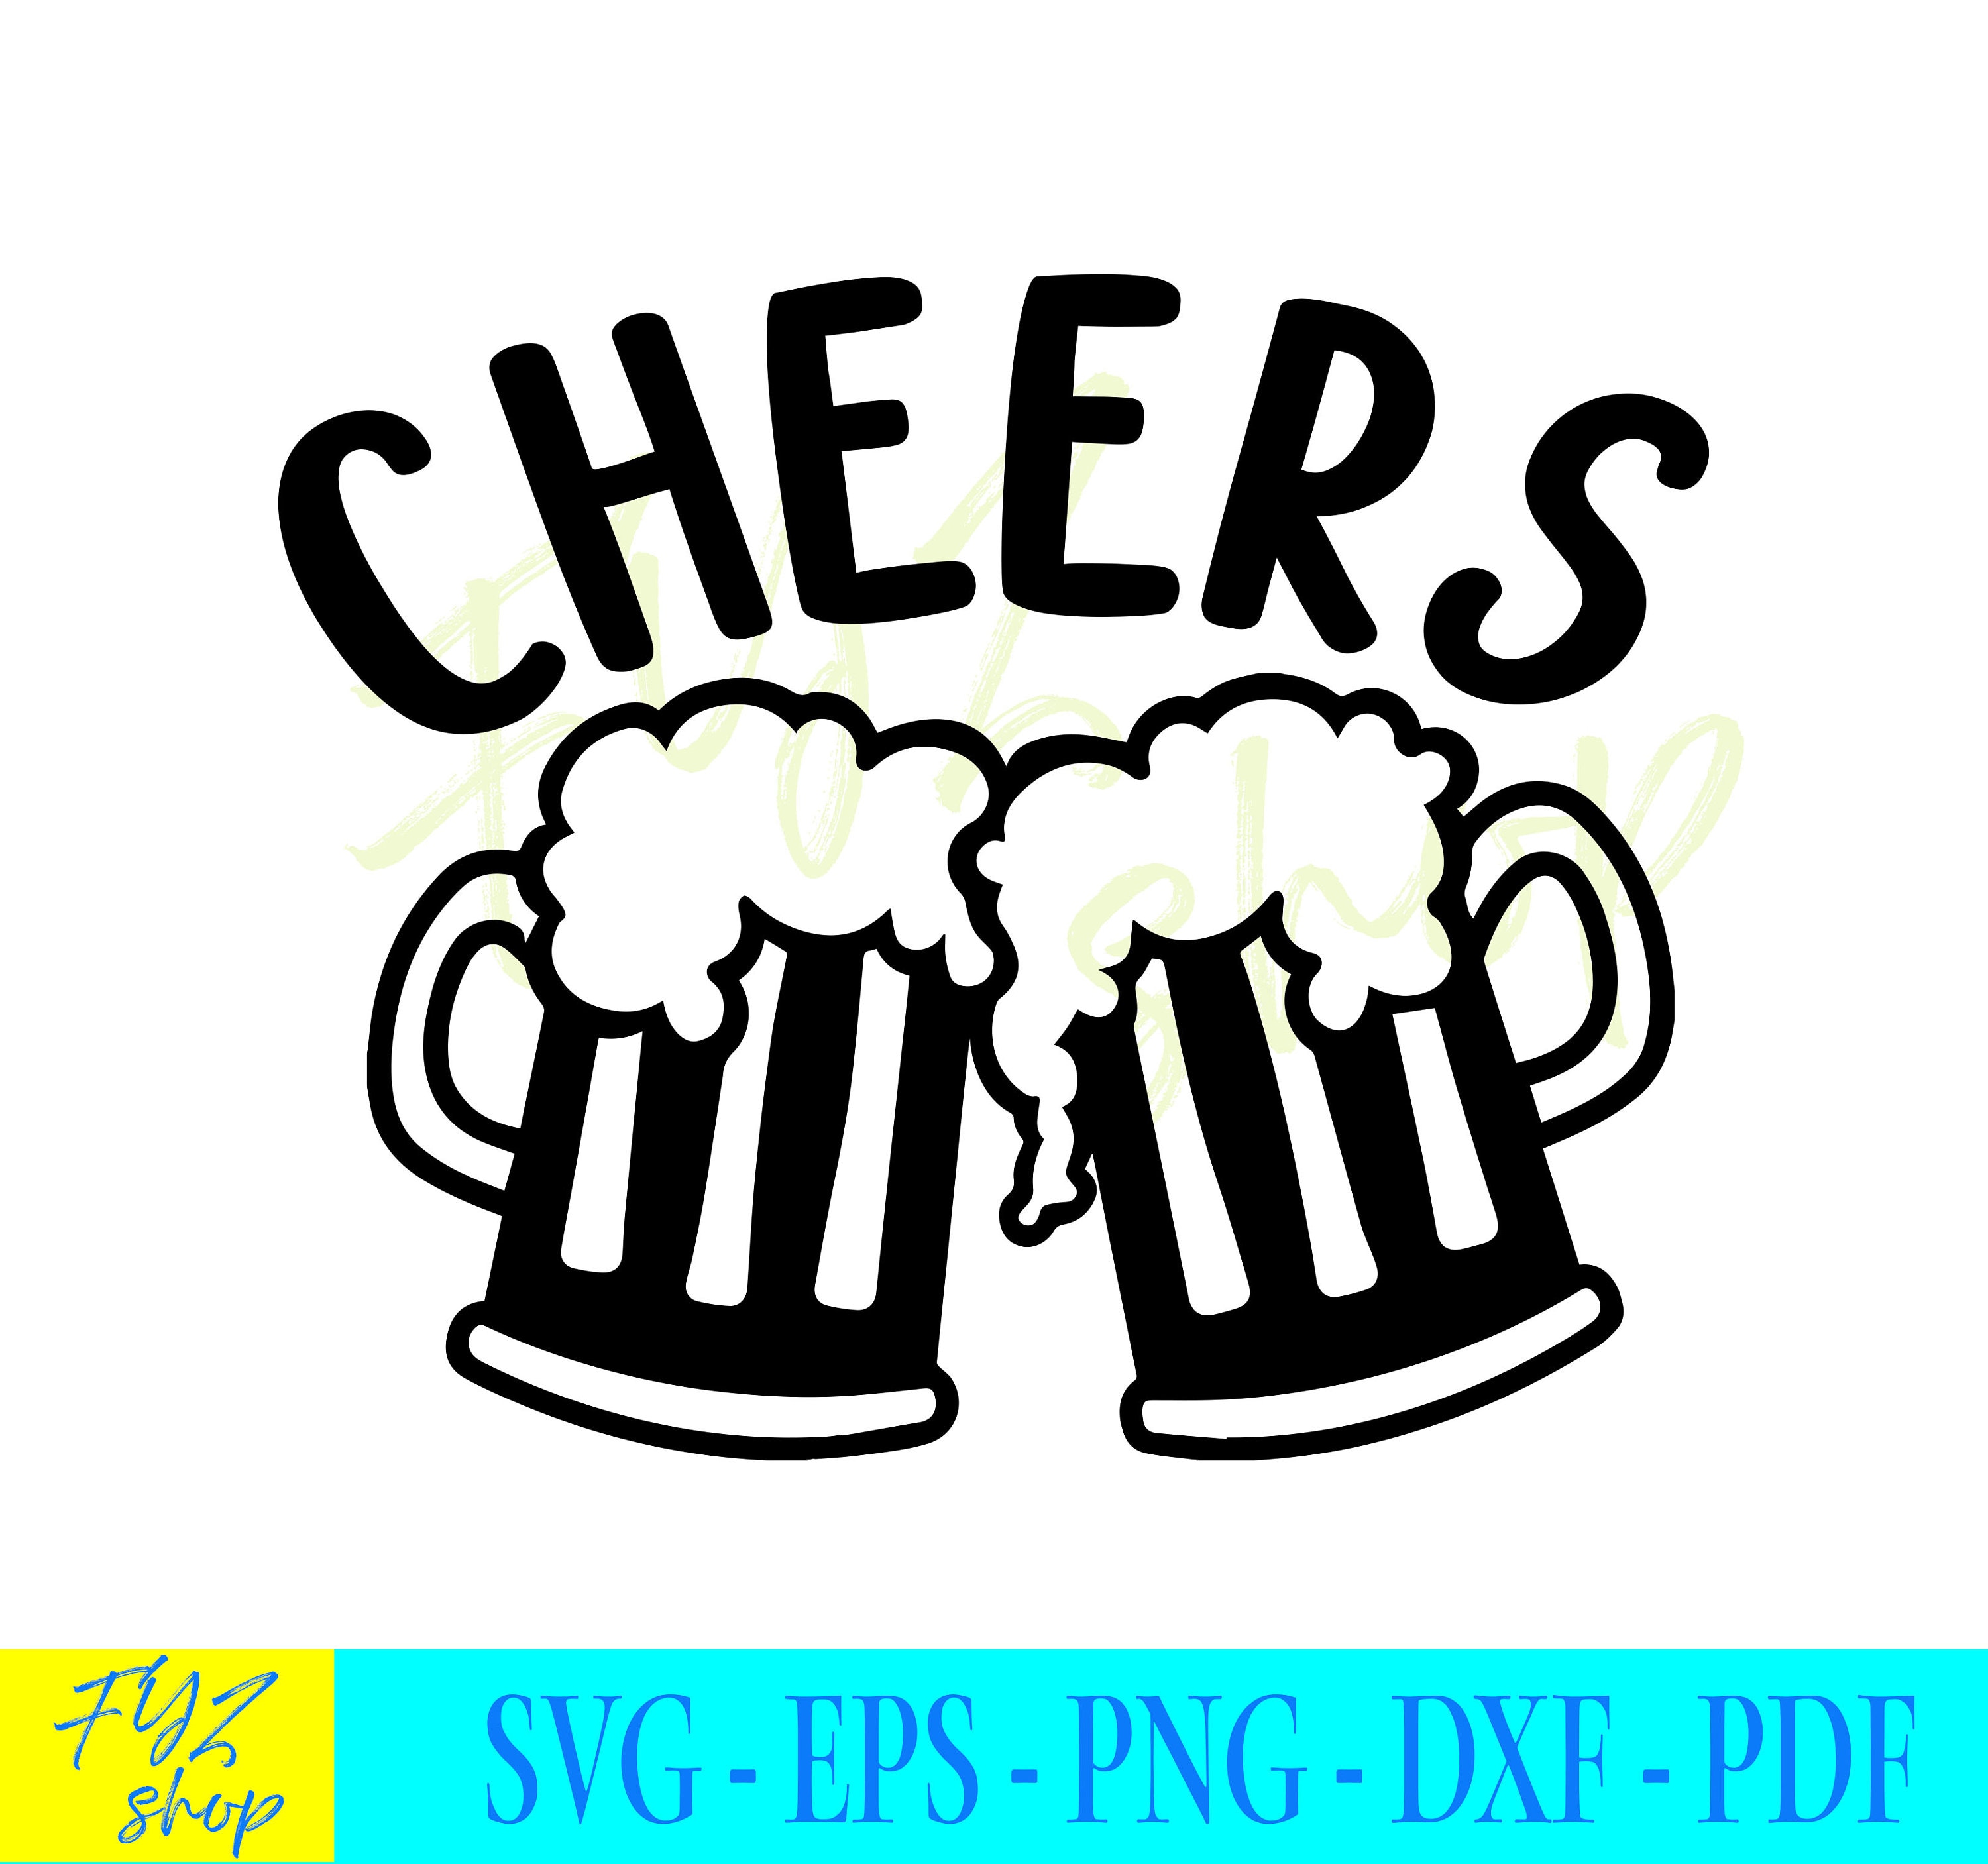 Cheers And Beers Svg Beer Svg Beer Mug Svg Th Svg Etsy My Xxx Hot Girl